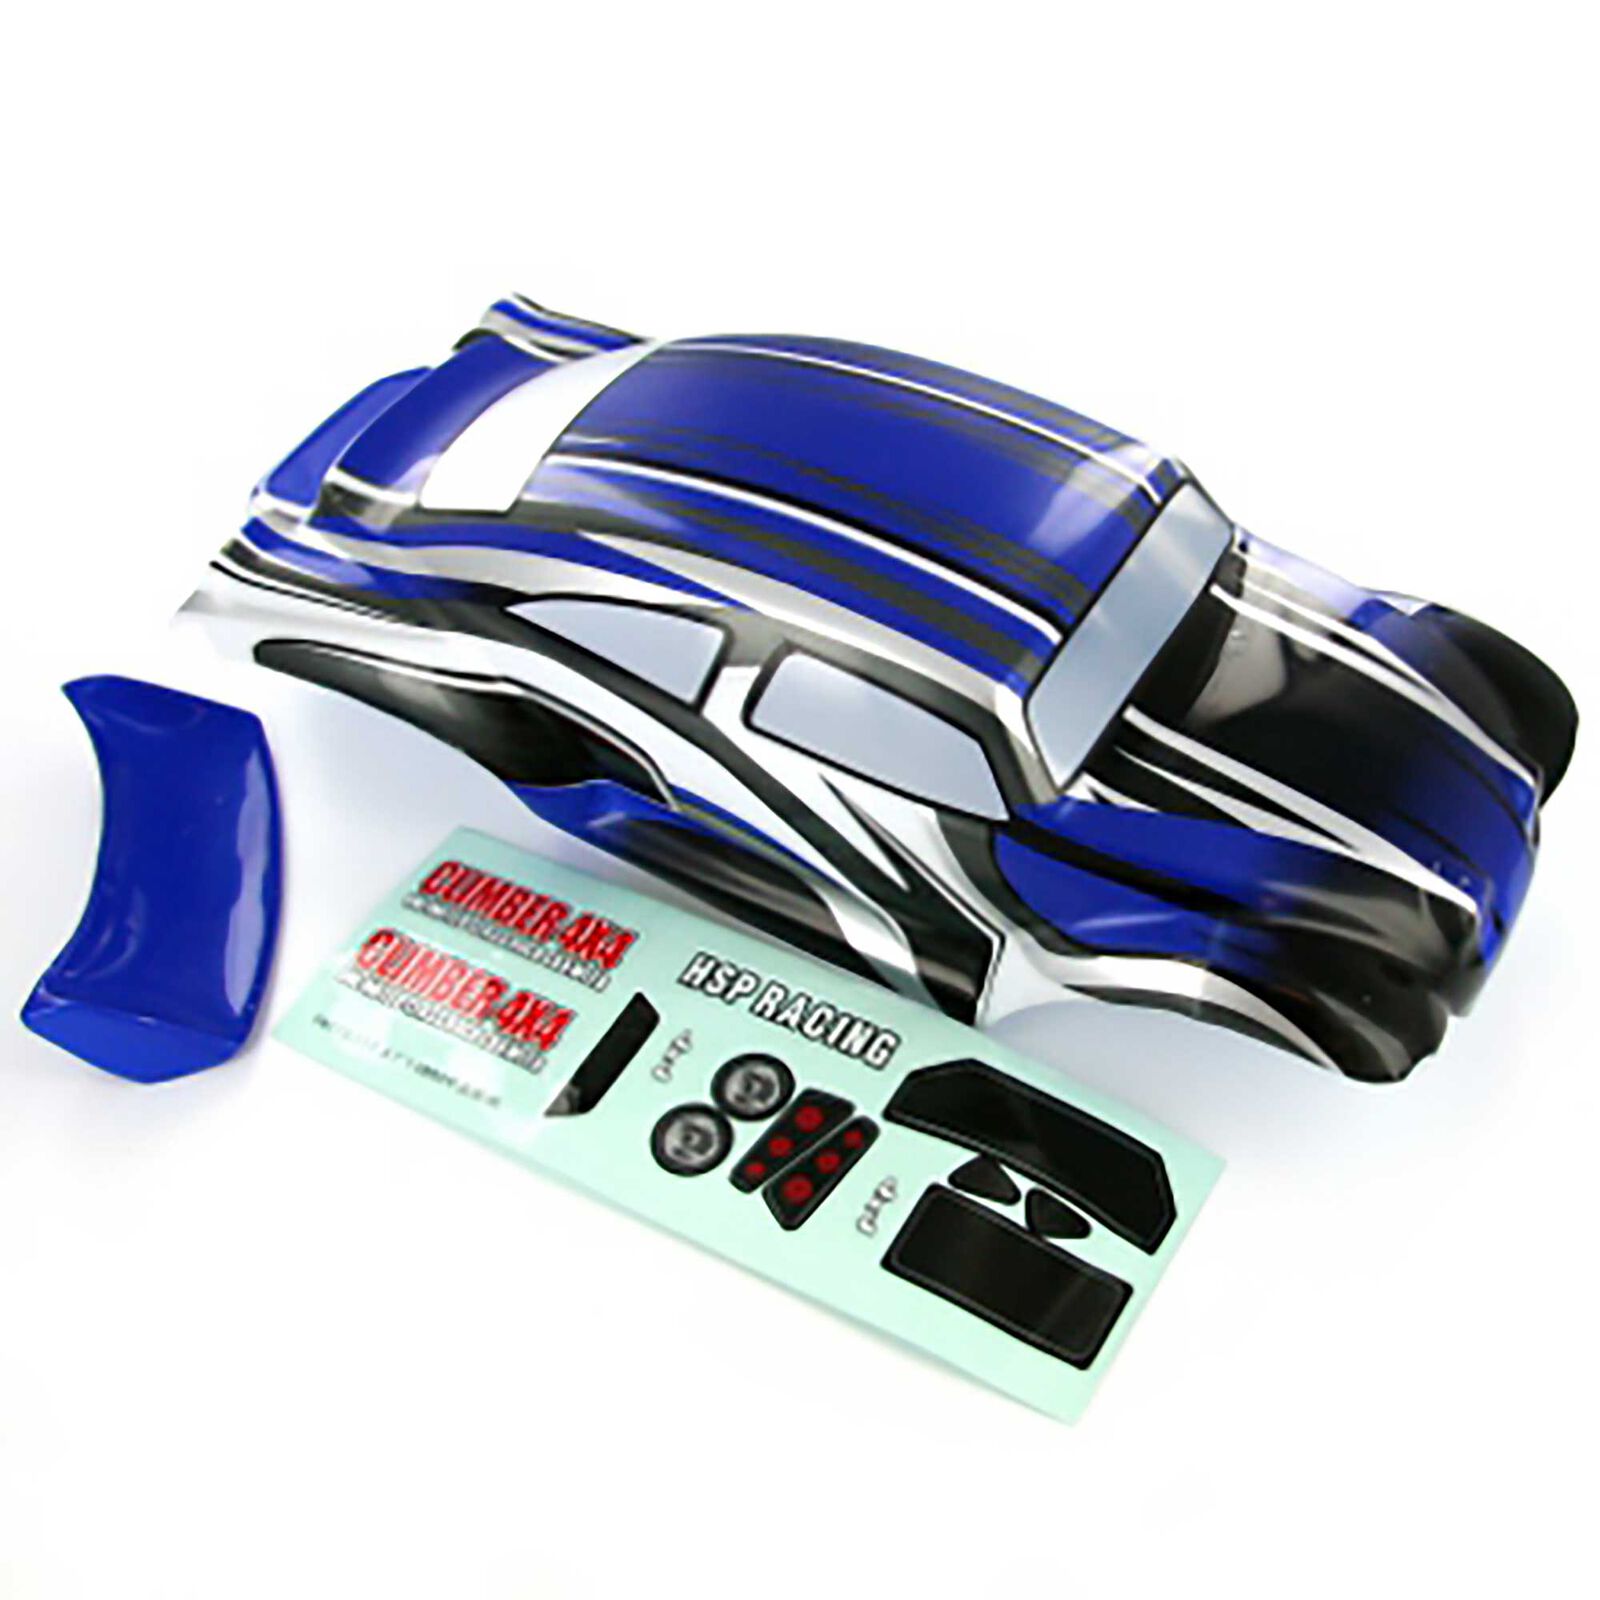 1/10 Painted Baja Body, Blue and Black: Volcano EPX/PRO